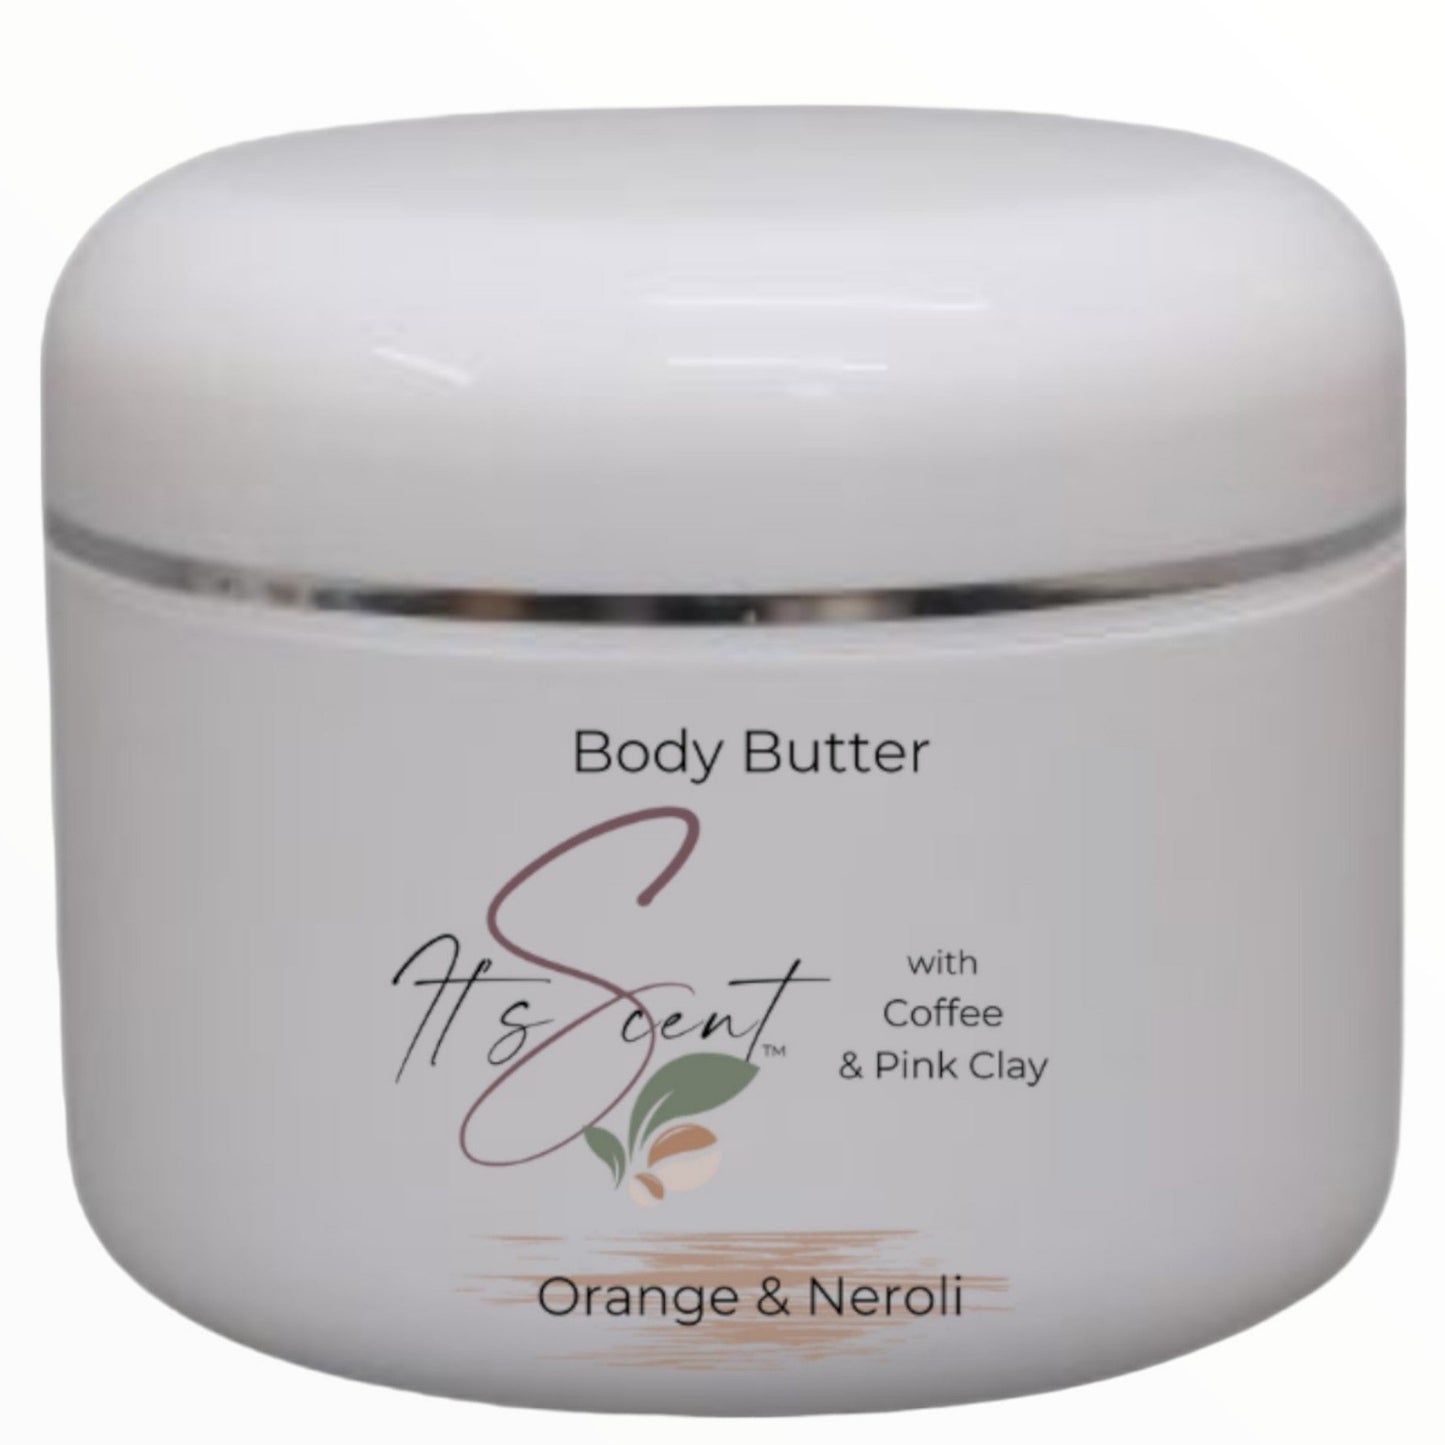 Orange & Neroli with Coffee  Whipped Body butter.